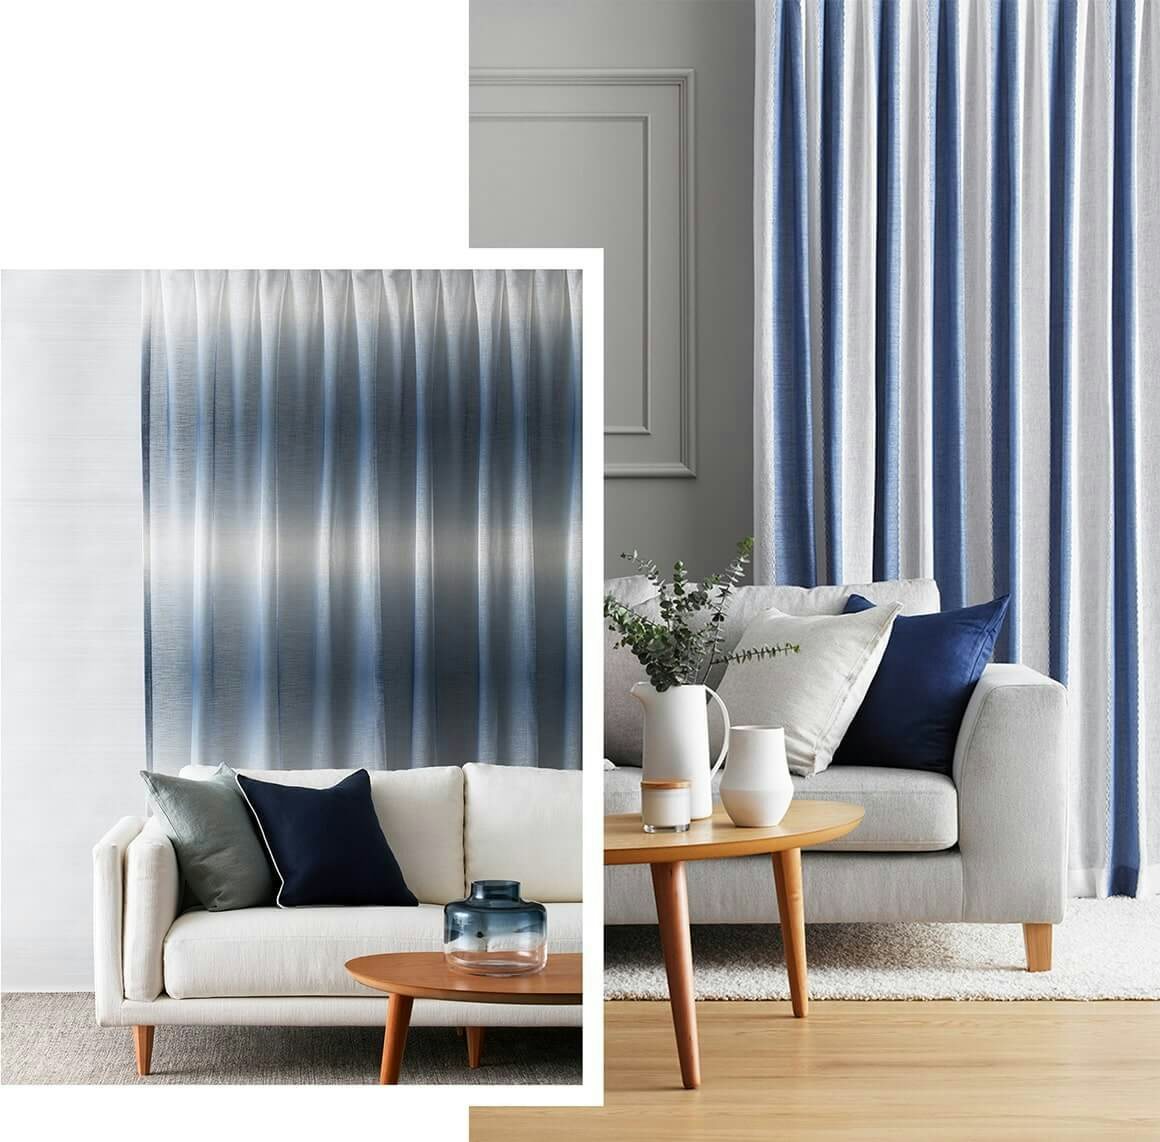 various blue and white striped curtains in modern lounge rooms